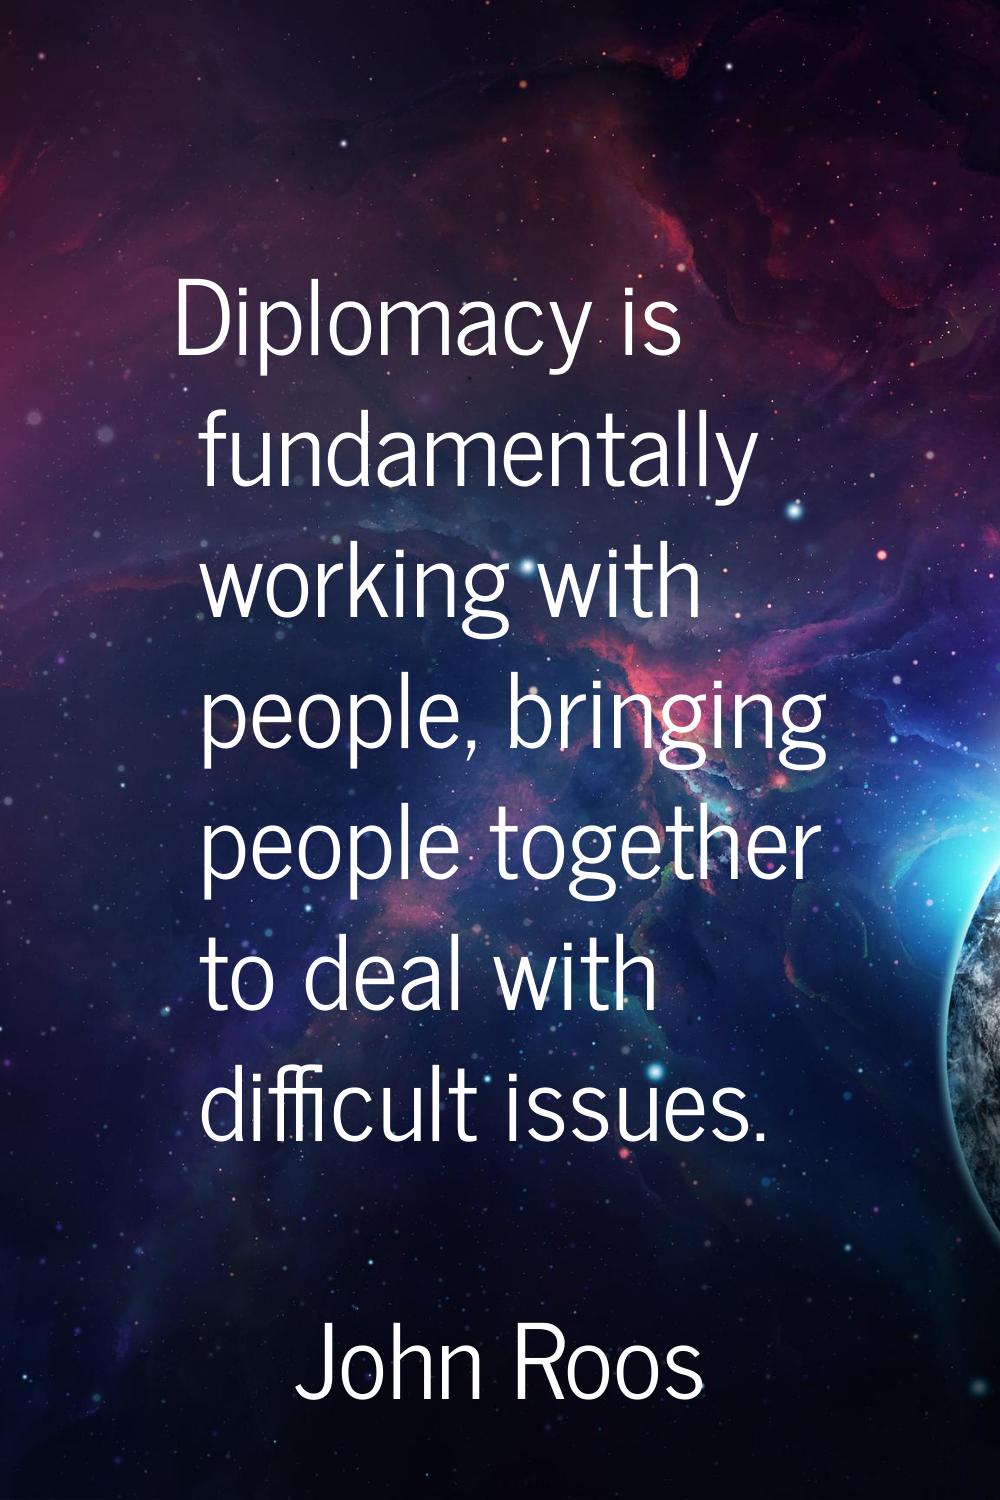 Diplomacy is fundamentally working with people, bringing people together to deal with difficult iss